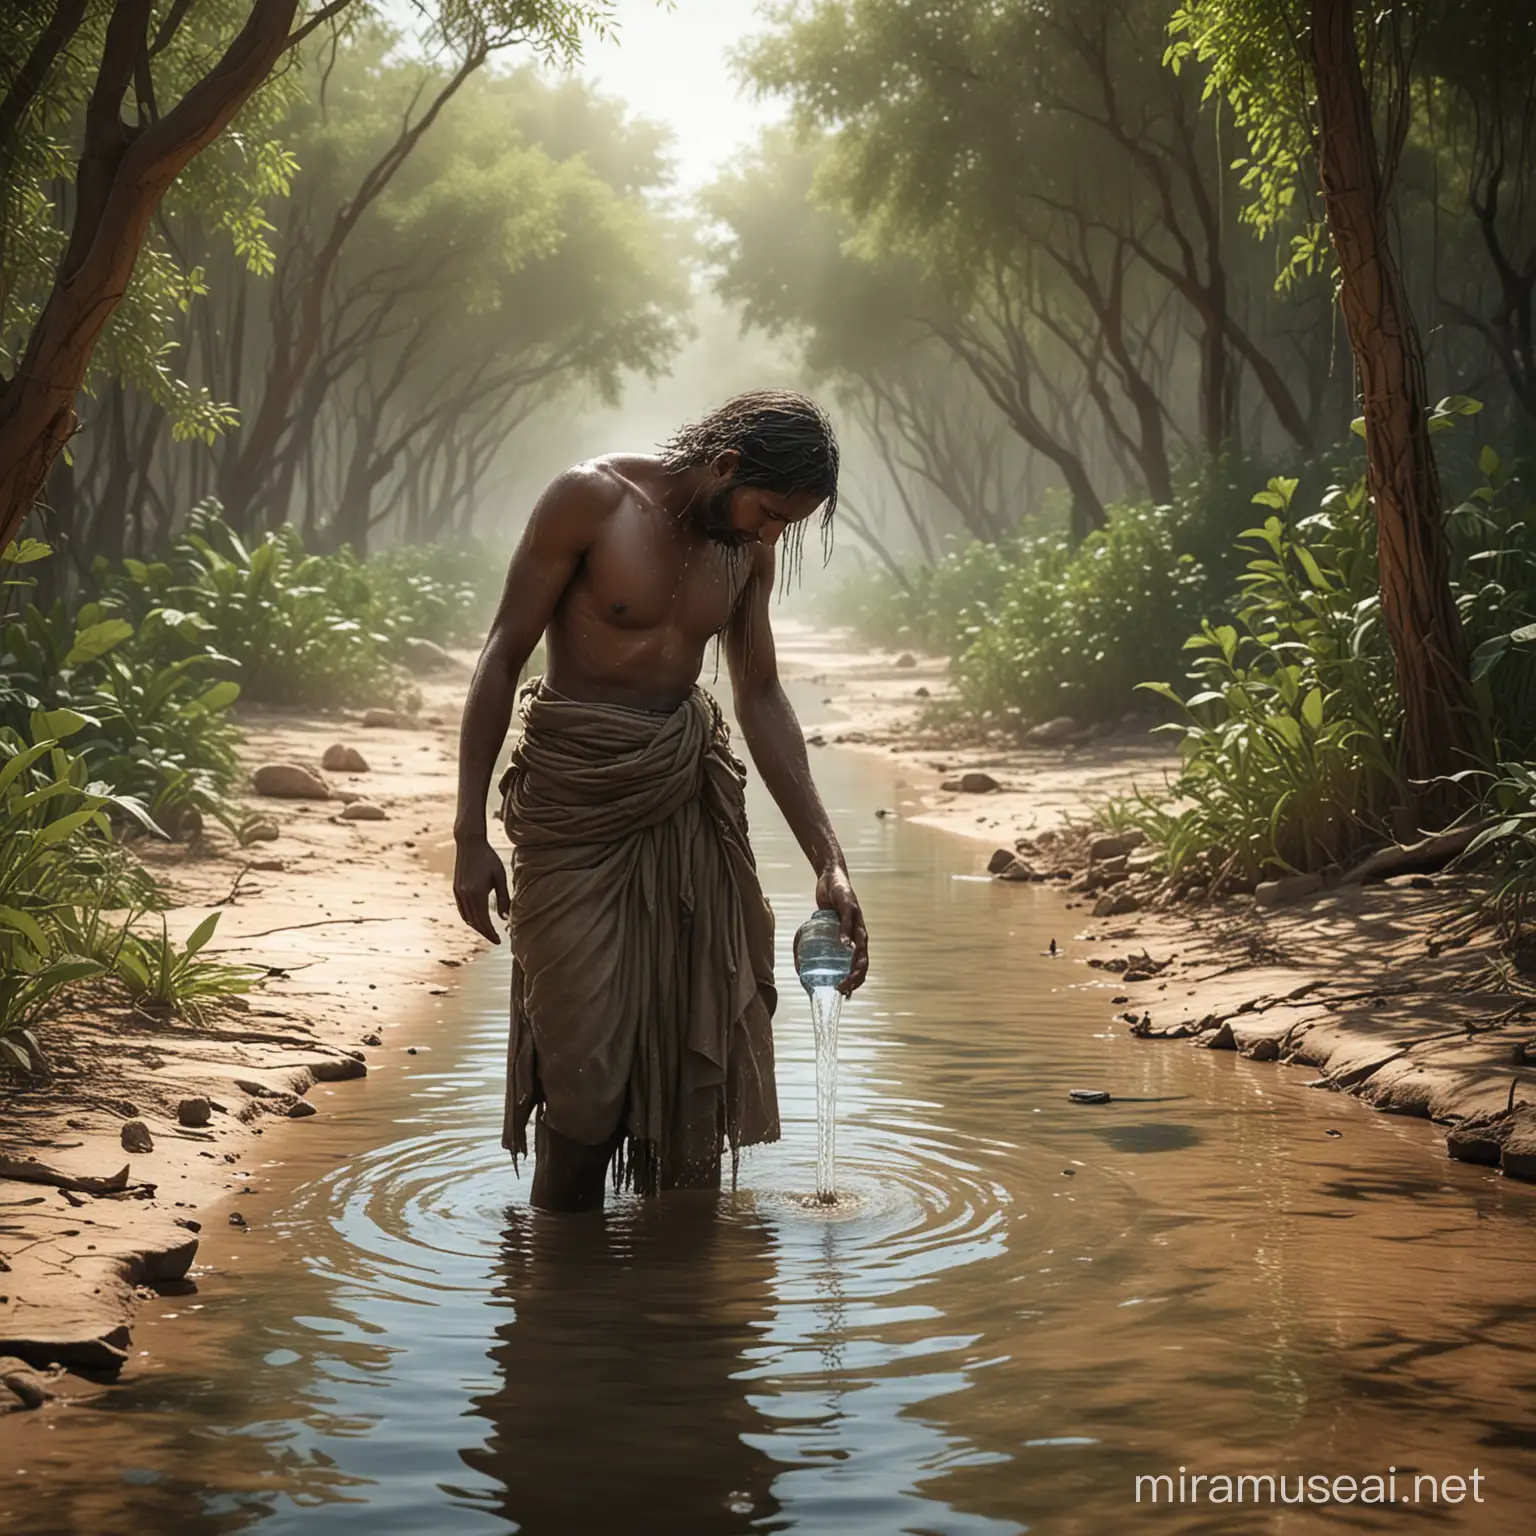 Create an AI-generated image depicting a parched, desperate figure visibly thirsty, hydrated individual amidst lush greenery, symbolizing the promise of guaranteed access to pure water for all. The scene should evoke a powerful narrative of overcoming adversity and the transformative impact of ensuring water security for everyone.